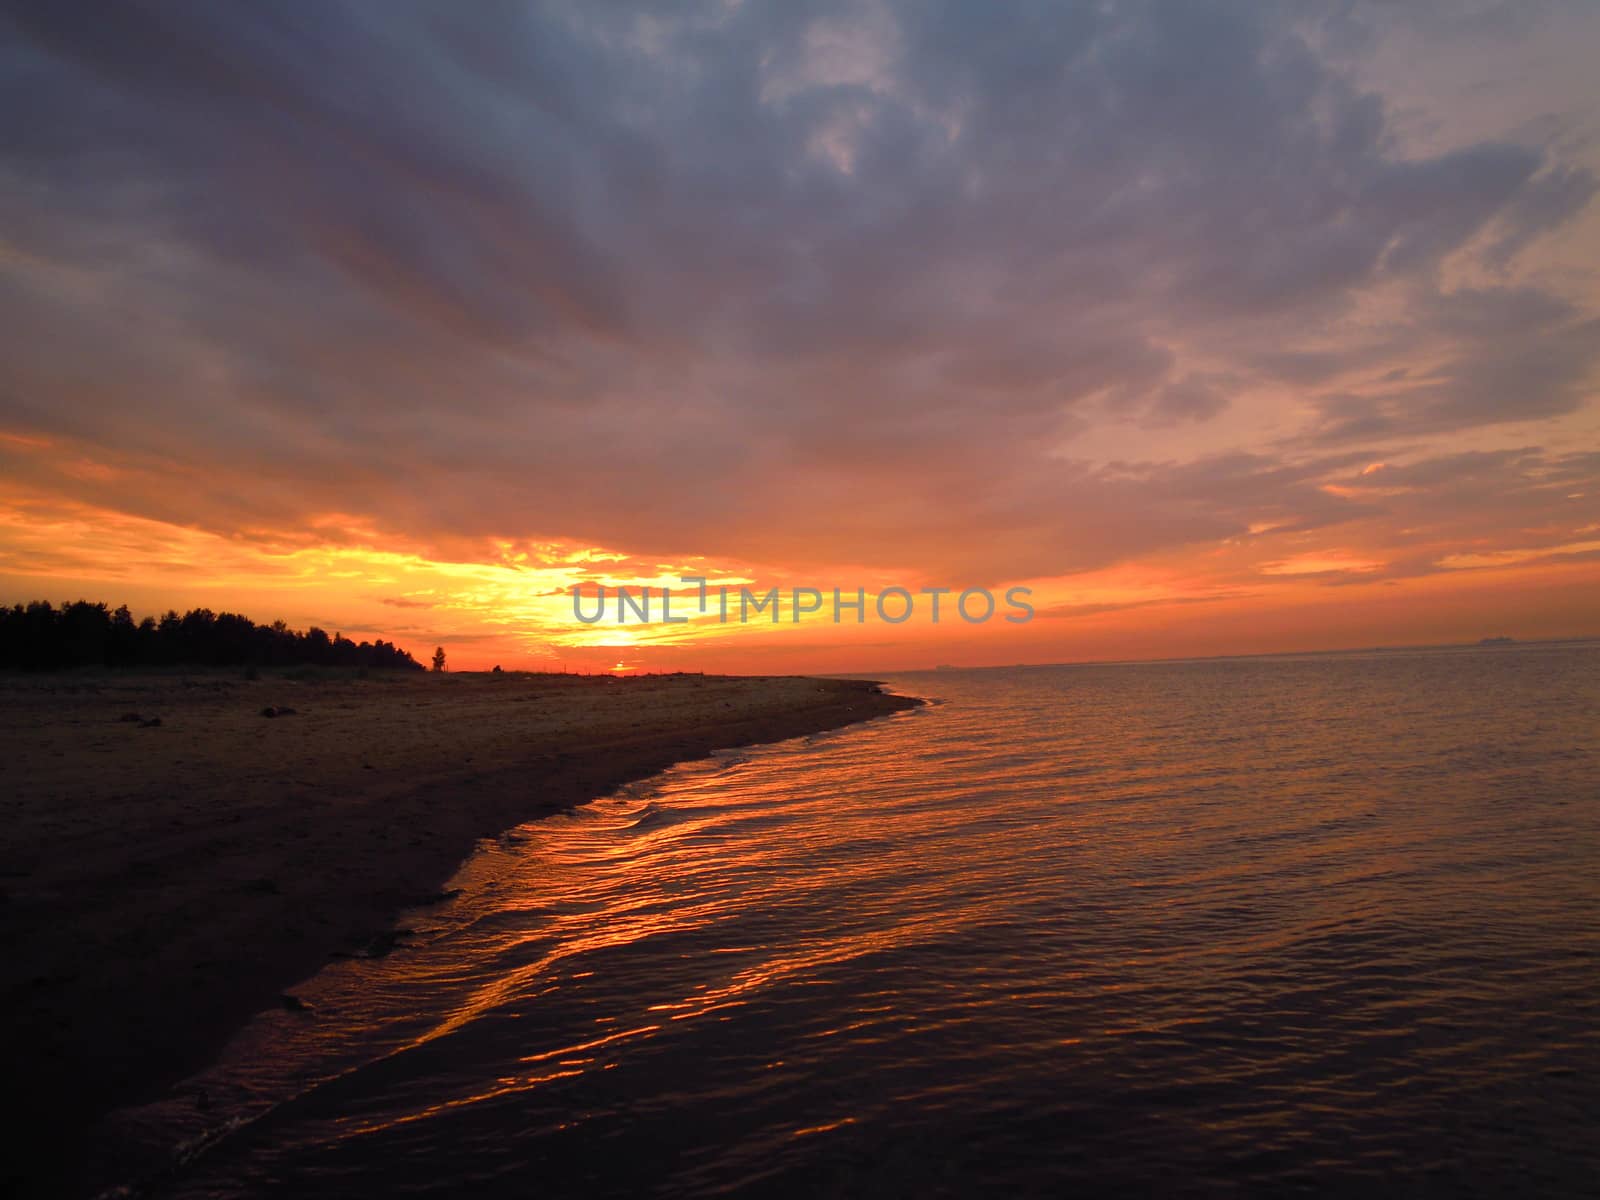 Sunset on the shore of the Gulf of Finland, Leningrad region, Russia.